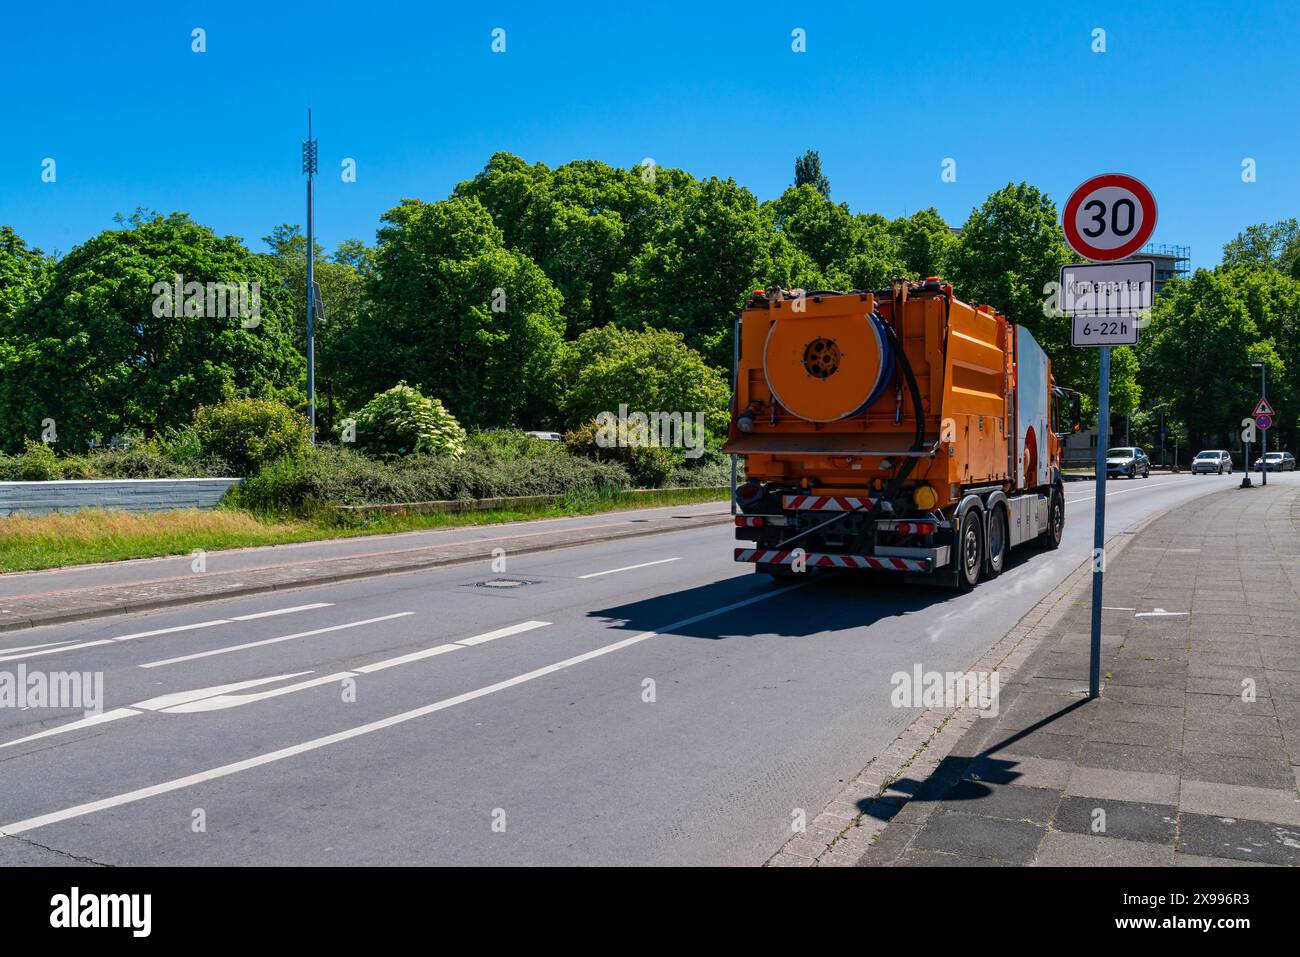 Rear view of an orange car for sewer cleaning in an urban environment. City street with rarely passing cars Stock Photo